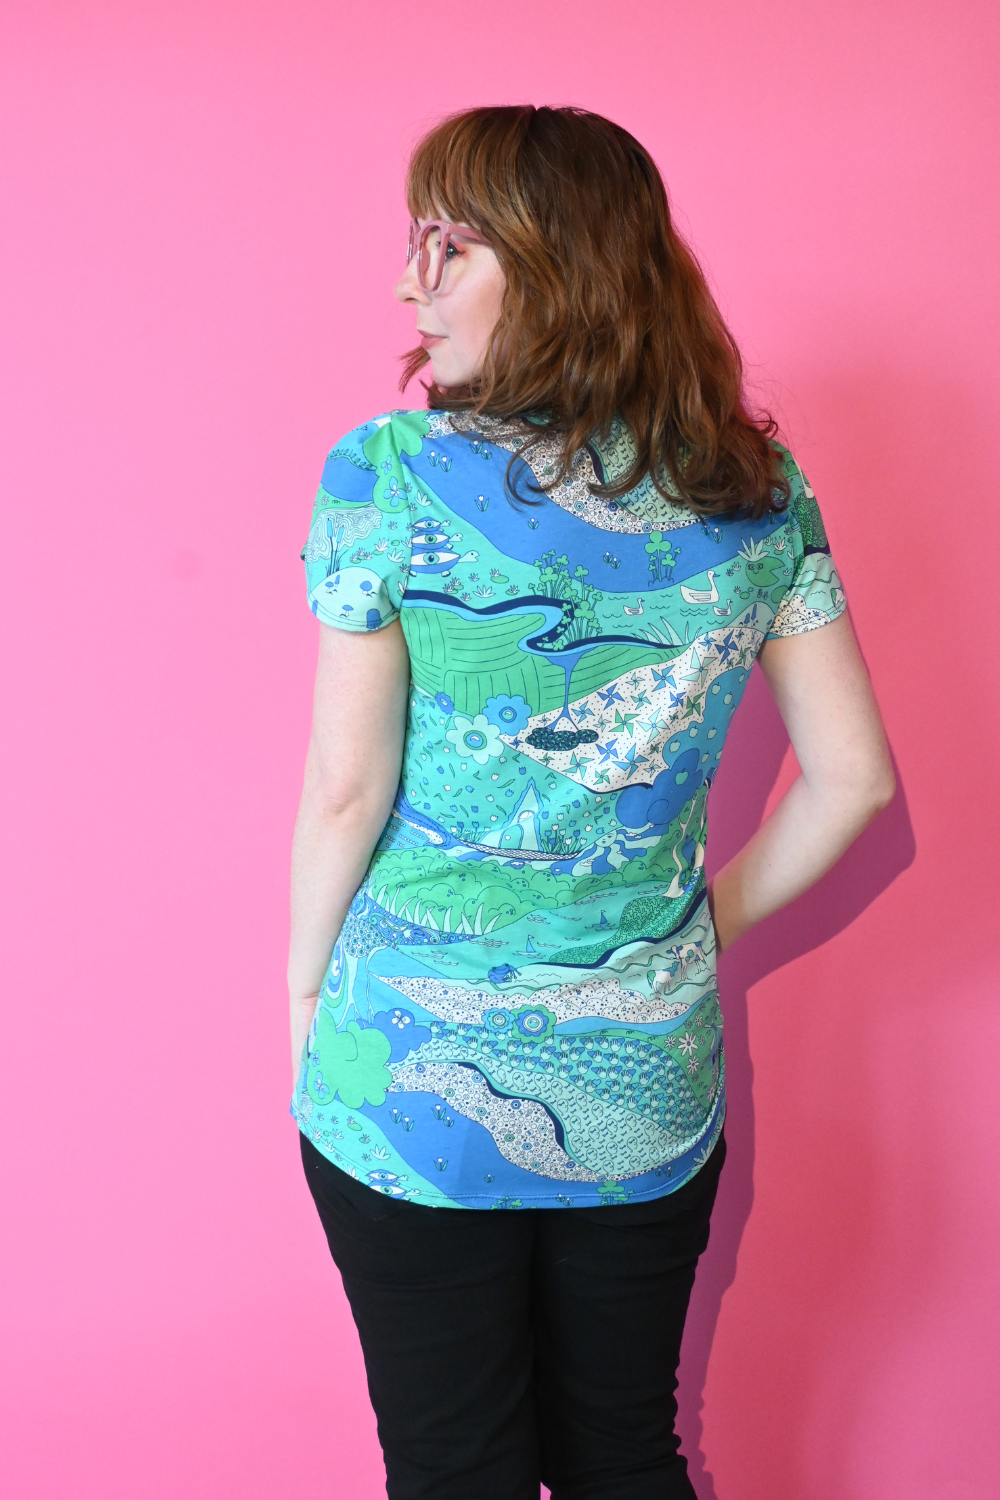 Back view of model wearing shirt with landscape graphic in green and blue